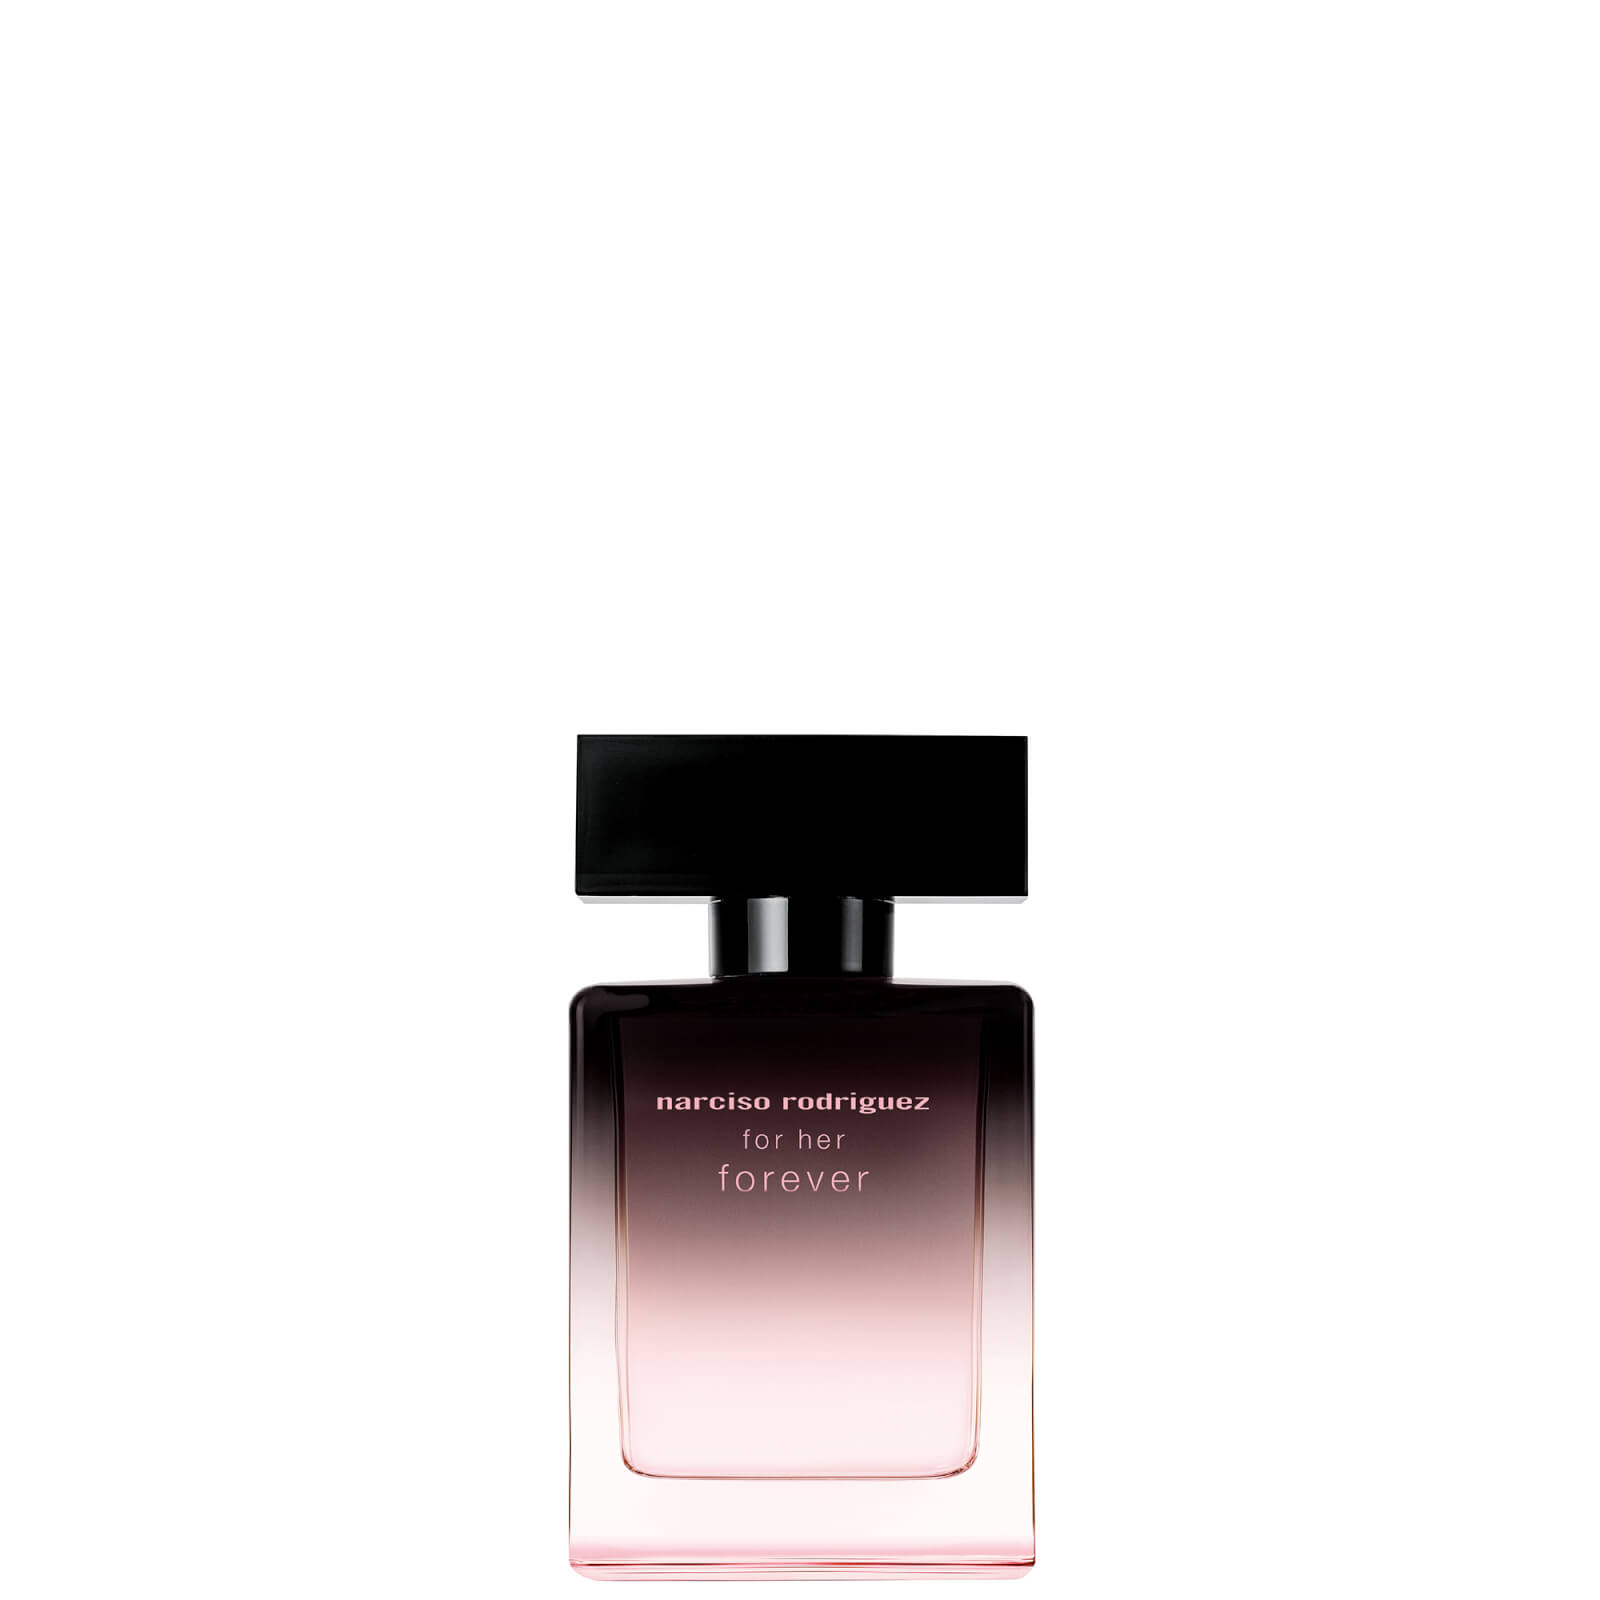 Image of Narciso Rodriguez for Her Forever Eau de Parfum Profumo 30ml